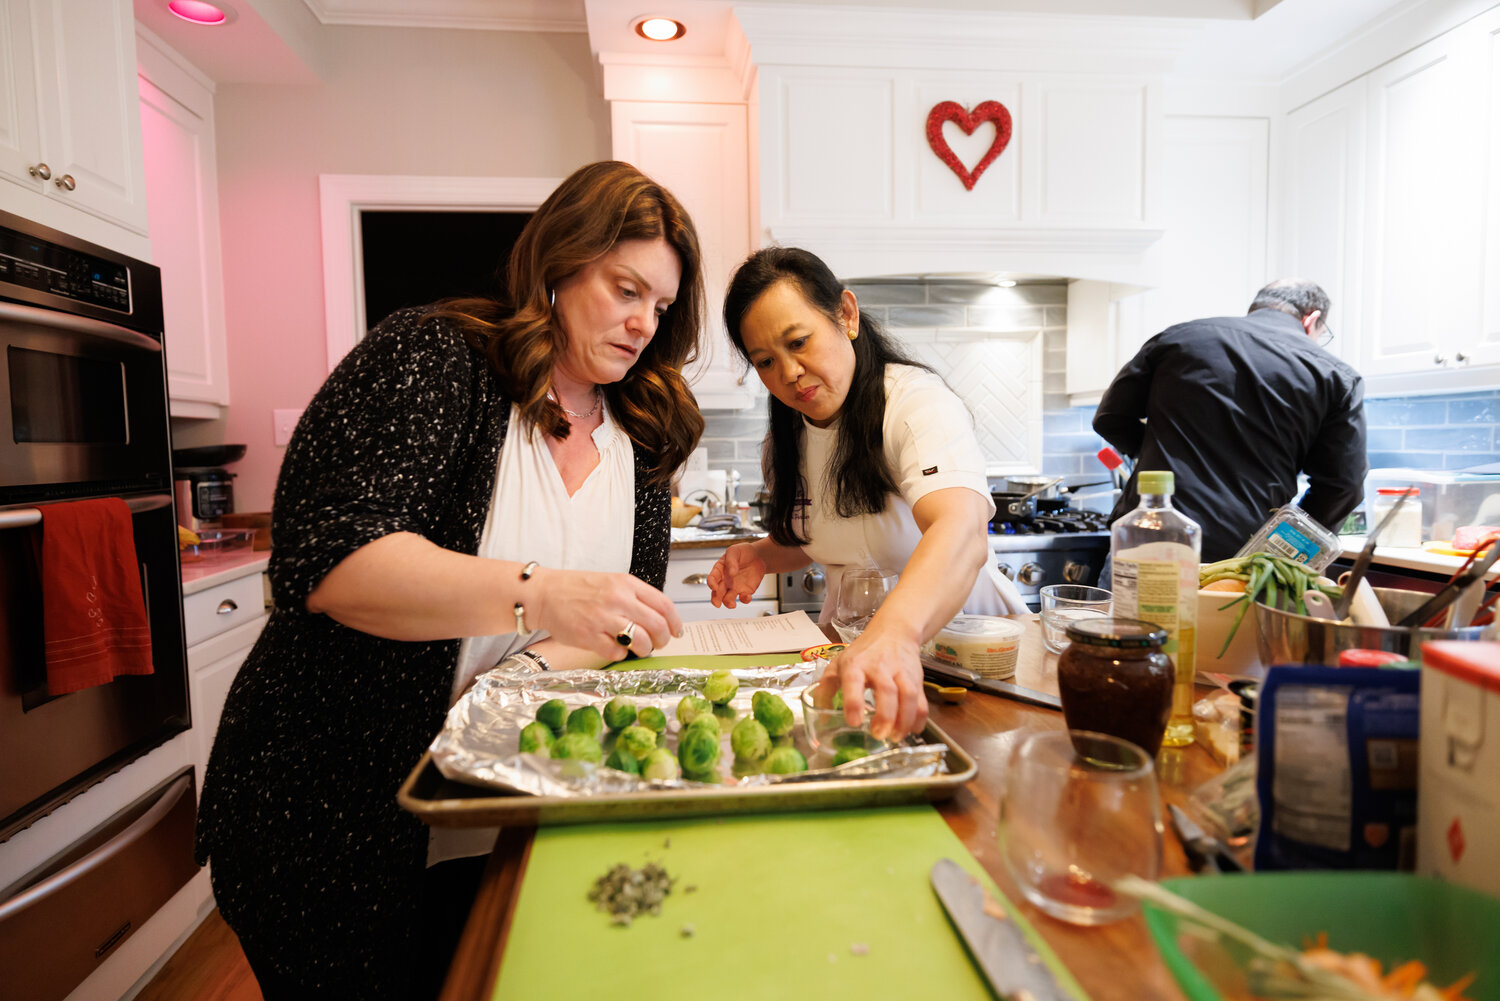 Barbara Wise (left) learns Chef Mai's smashing technique for her Crispy Smashed Brussels sprouts while her husband Brian begins sauteing squash for the Winter Squash Risotto with Sage and Pine Nuts.